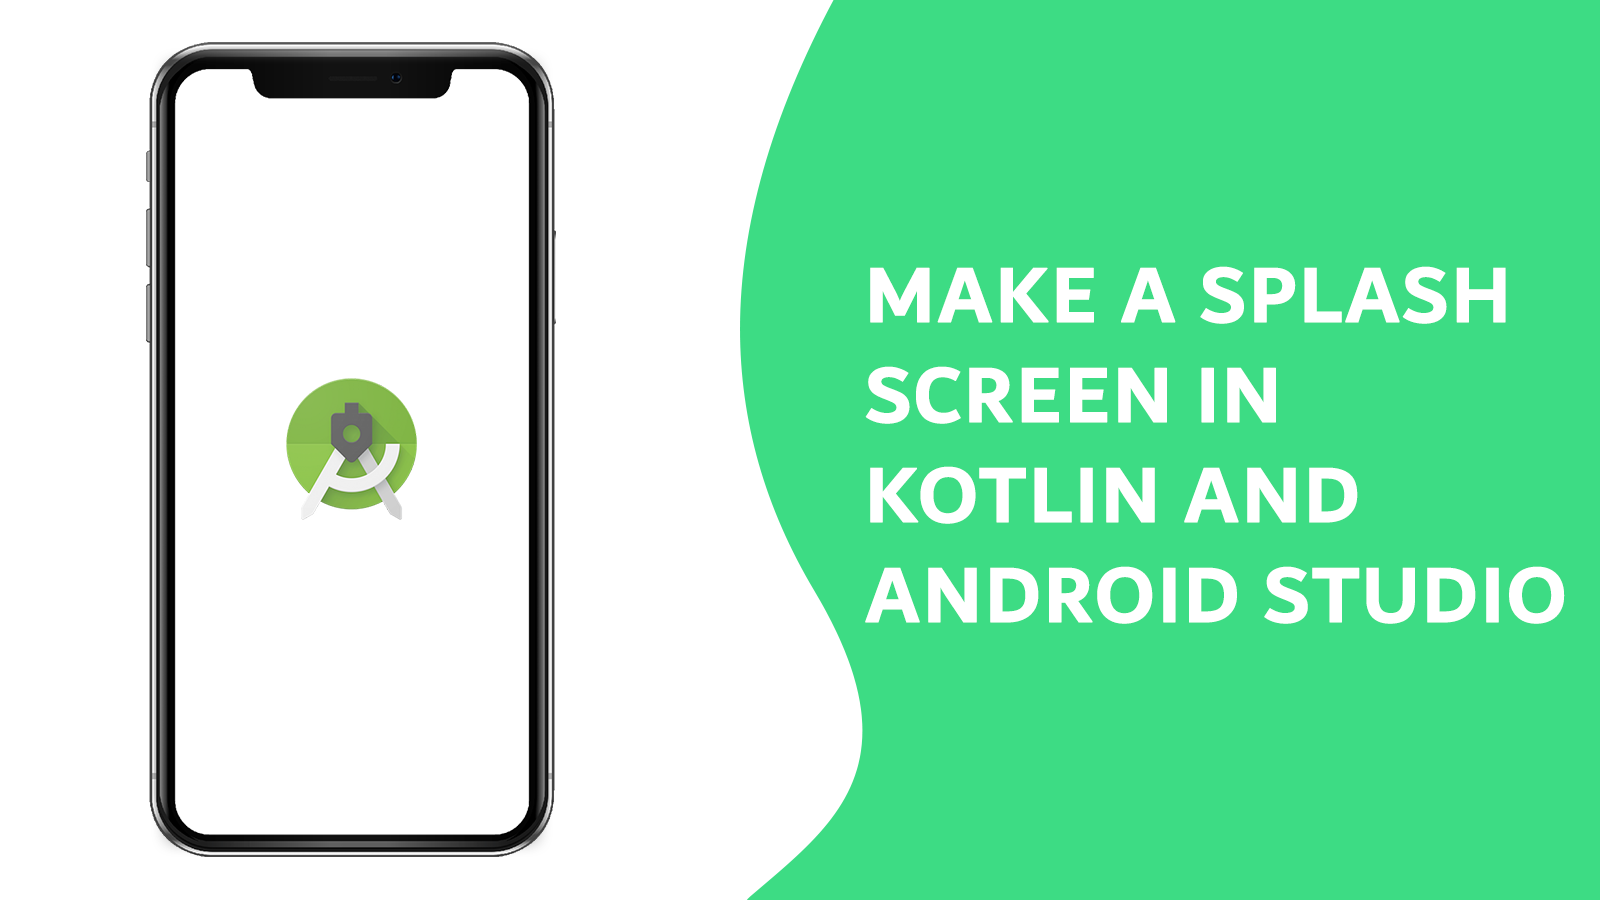 Make a Splash Screen in Android Studio and Kotlin - DoctorCode